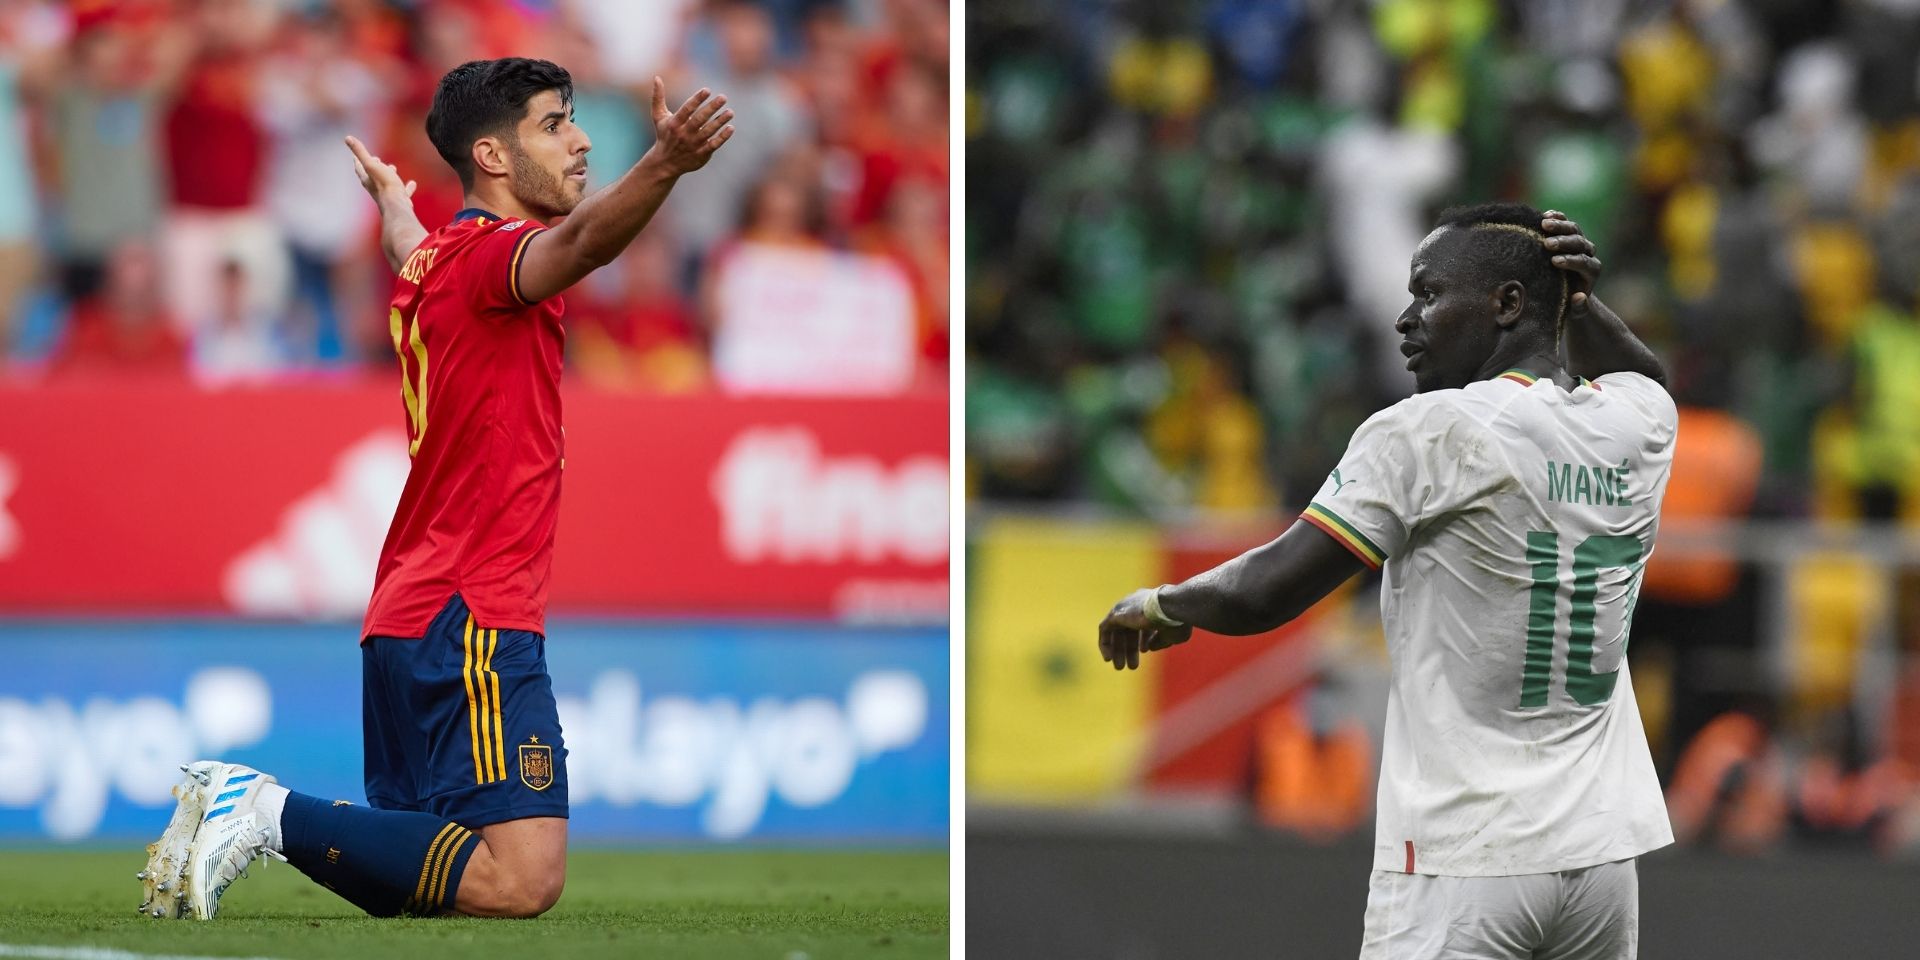 Liverpool want to fill ‘large gap’ left by Sadio Mane with ‘Real Madrid star Marco Asensio’ as Reds are ‘interested in signing the winger’